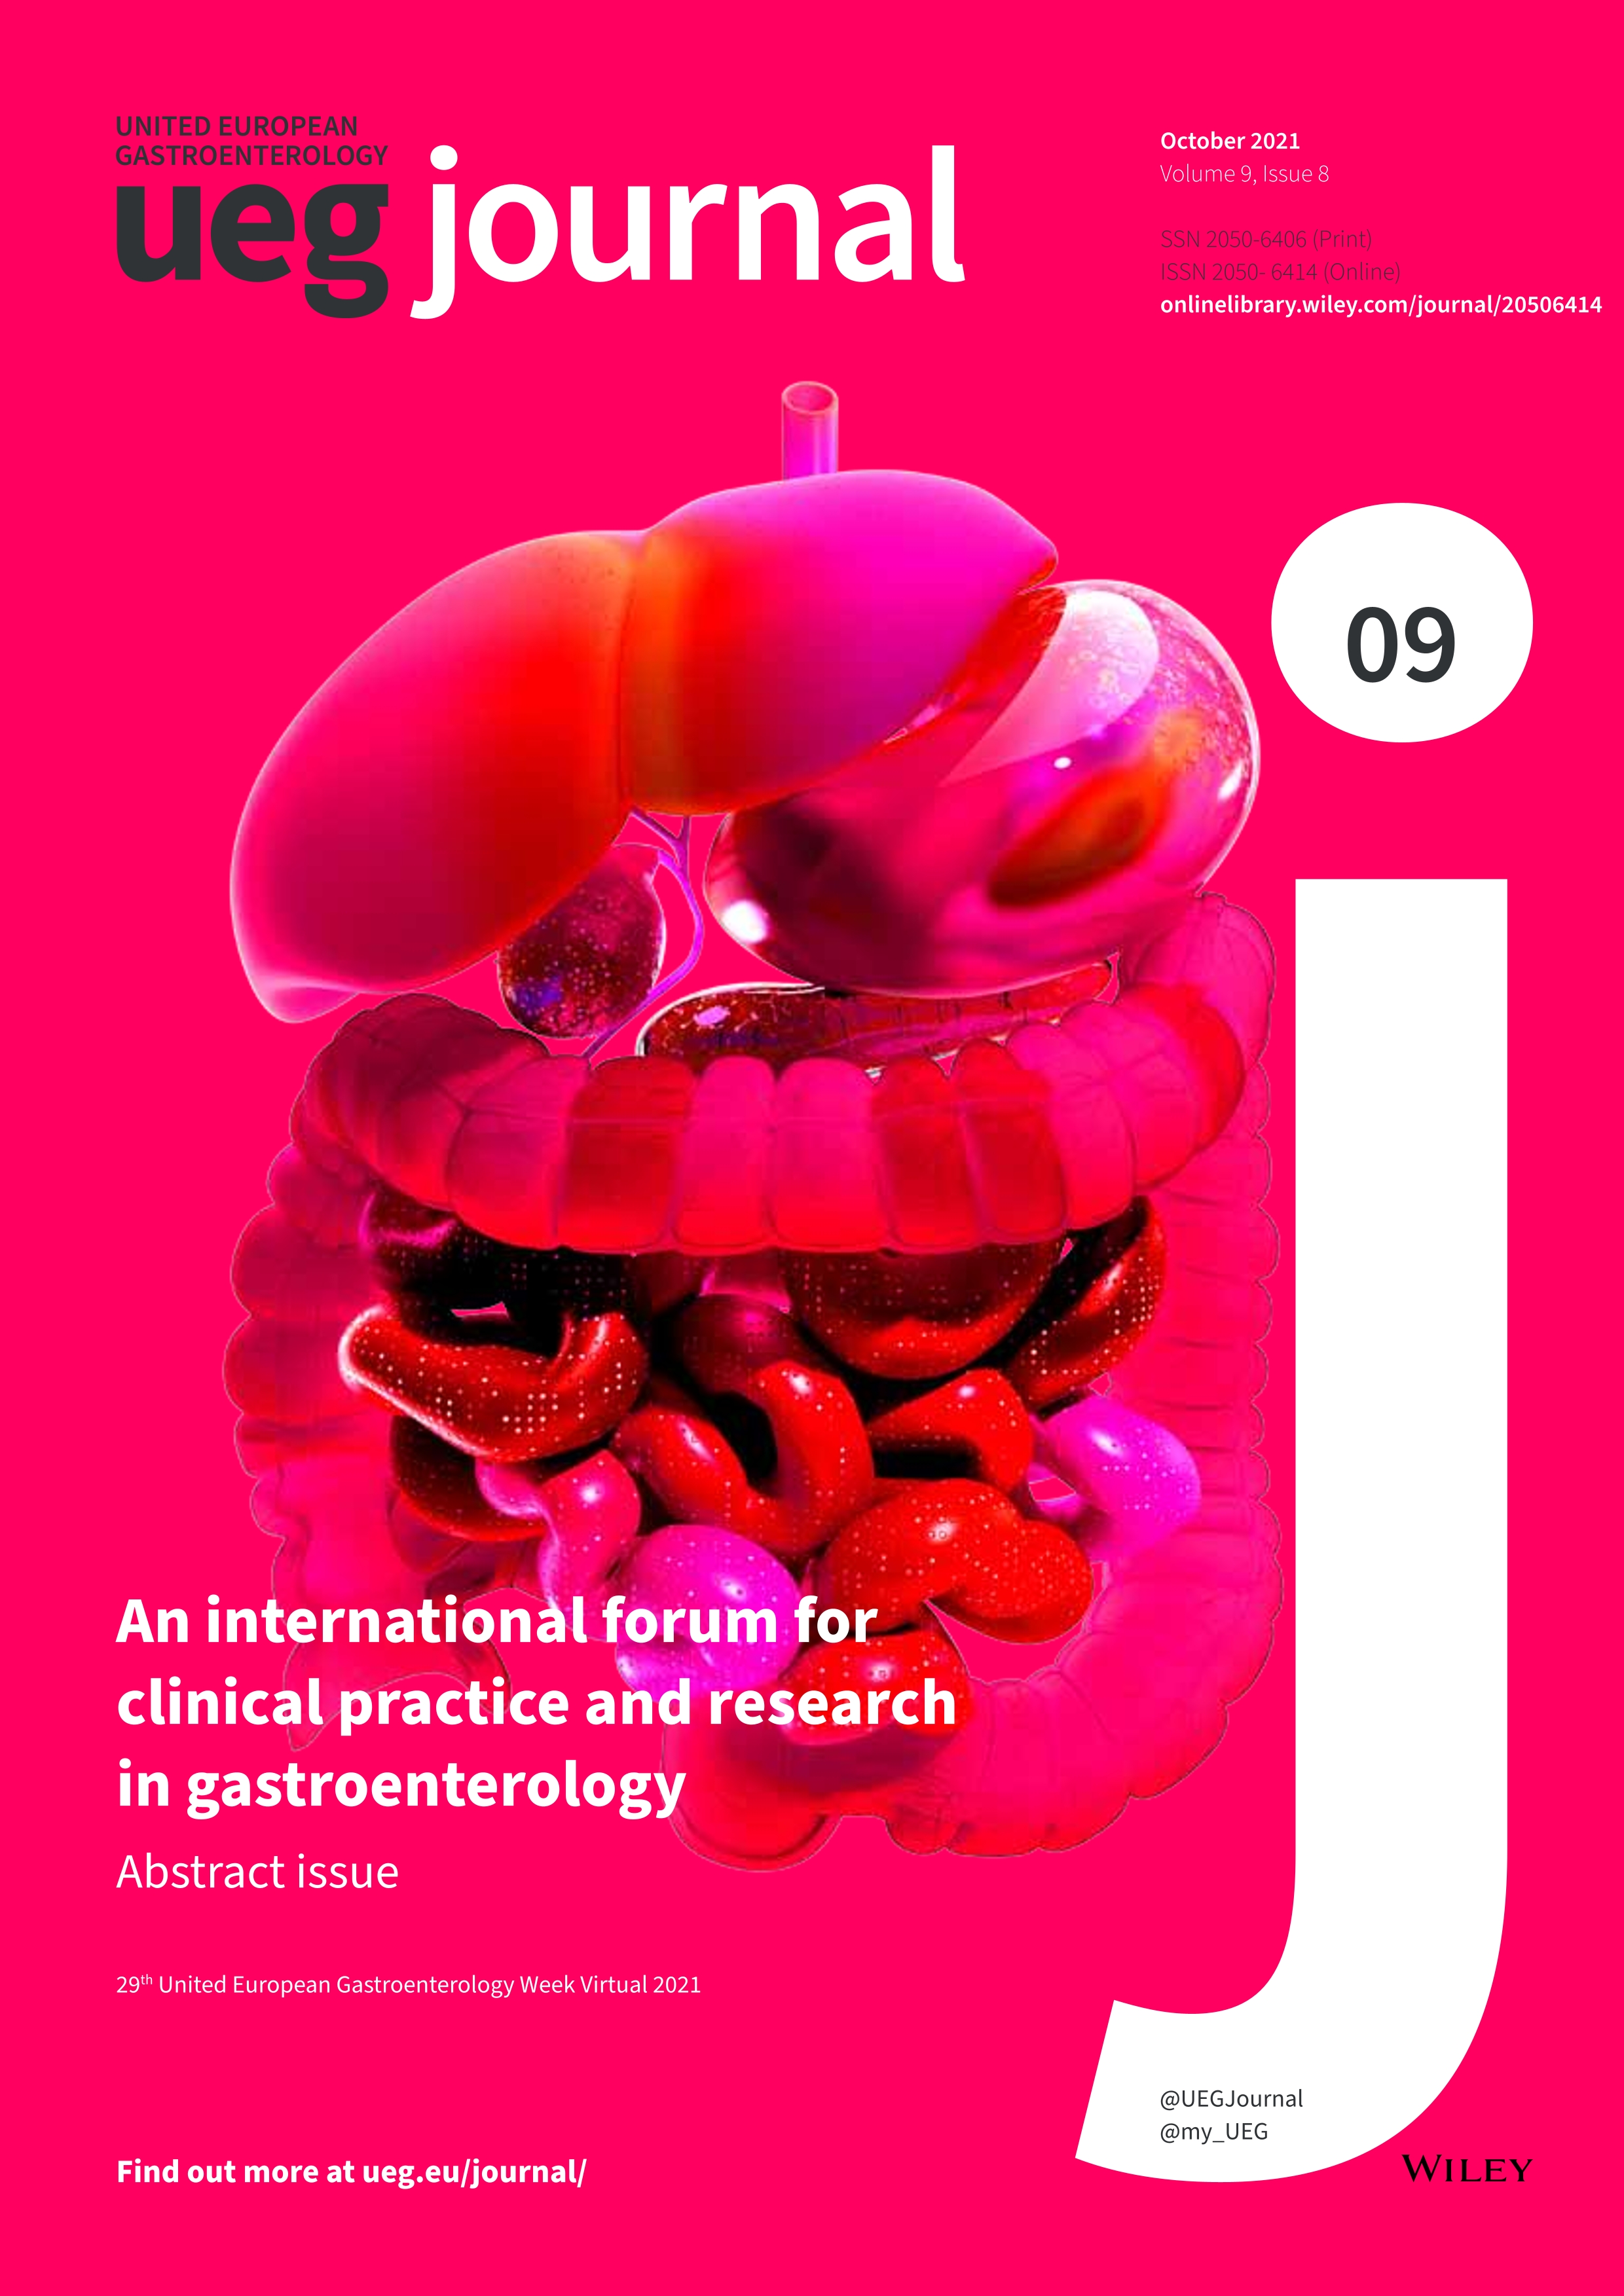 Native and saturated bovine lactoferrin modulate the expression of toll-like receptors (TLRS) in mice treated with antibiotics. P0203. 29th United European Gastroenterology Week Virtual 2021